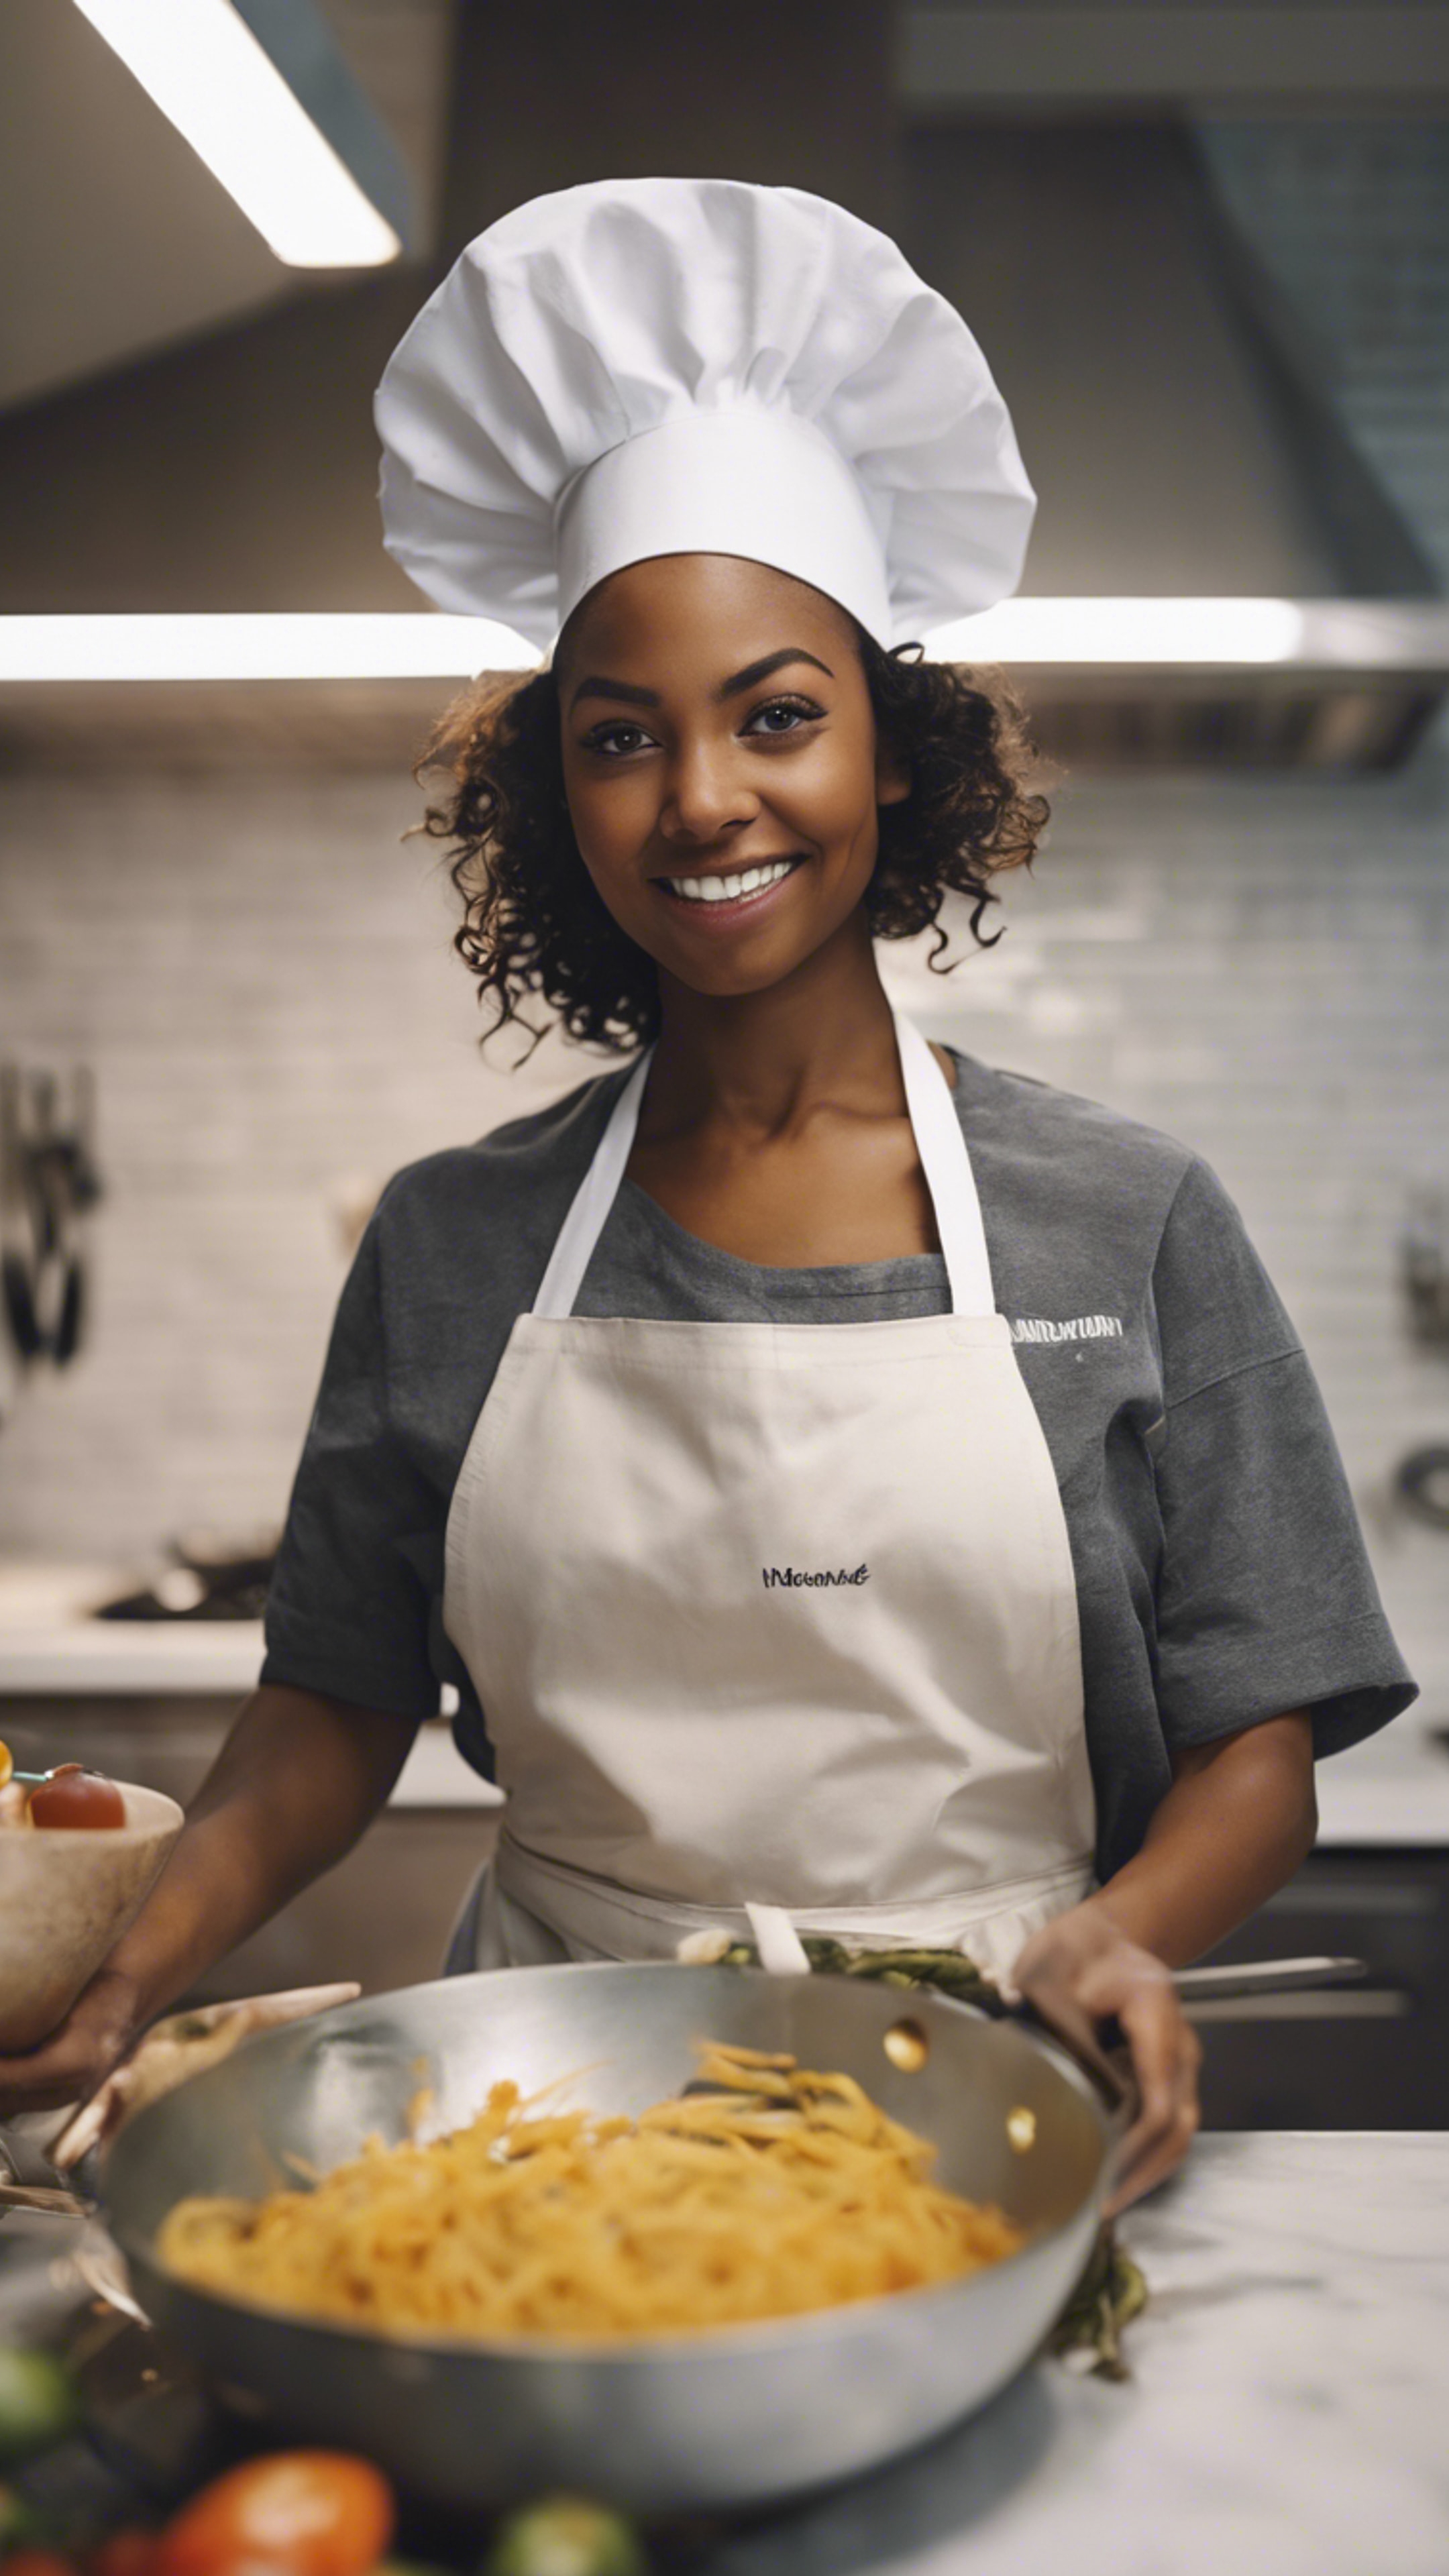 An enthusiastic black girl wearing chef’s hat and apron cooking in a modern kitchen. Wallpaper[28127f79c89b4e3a826e]